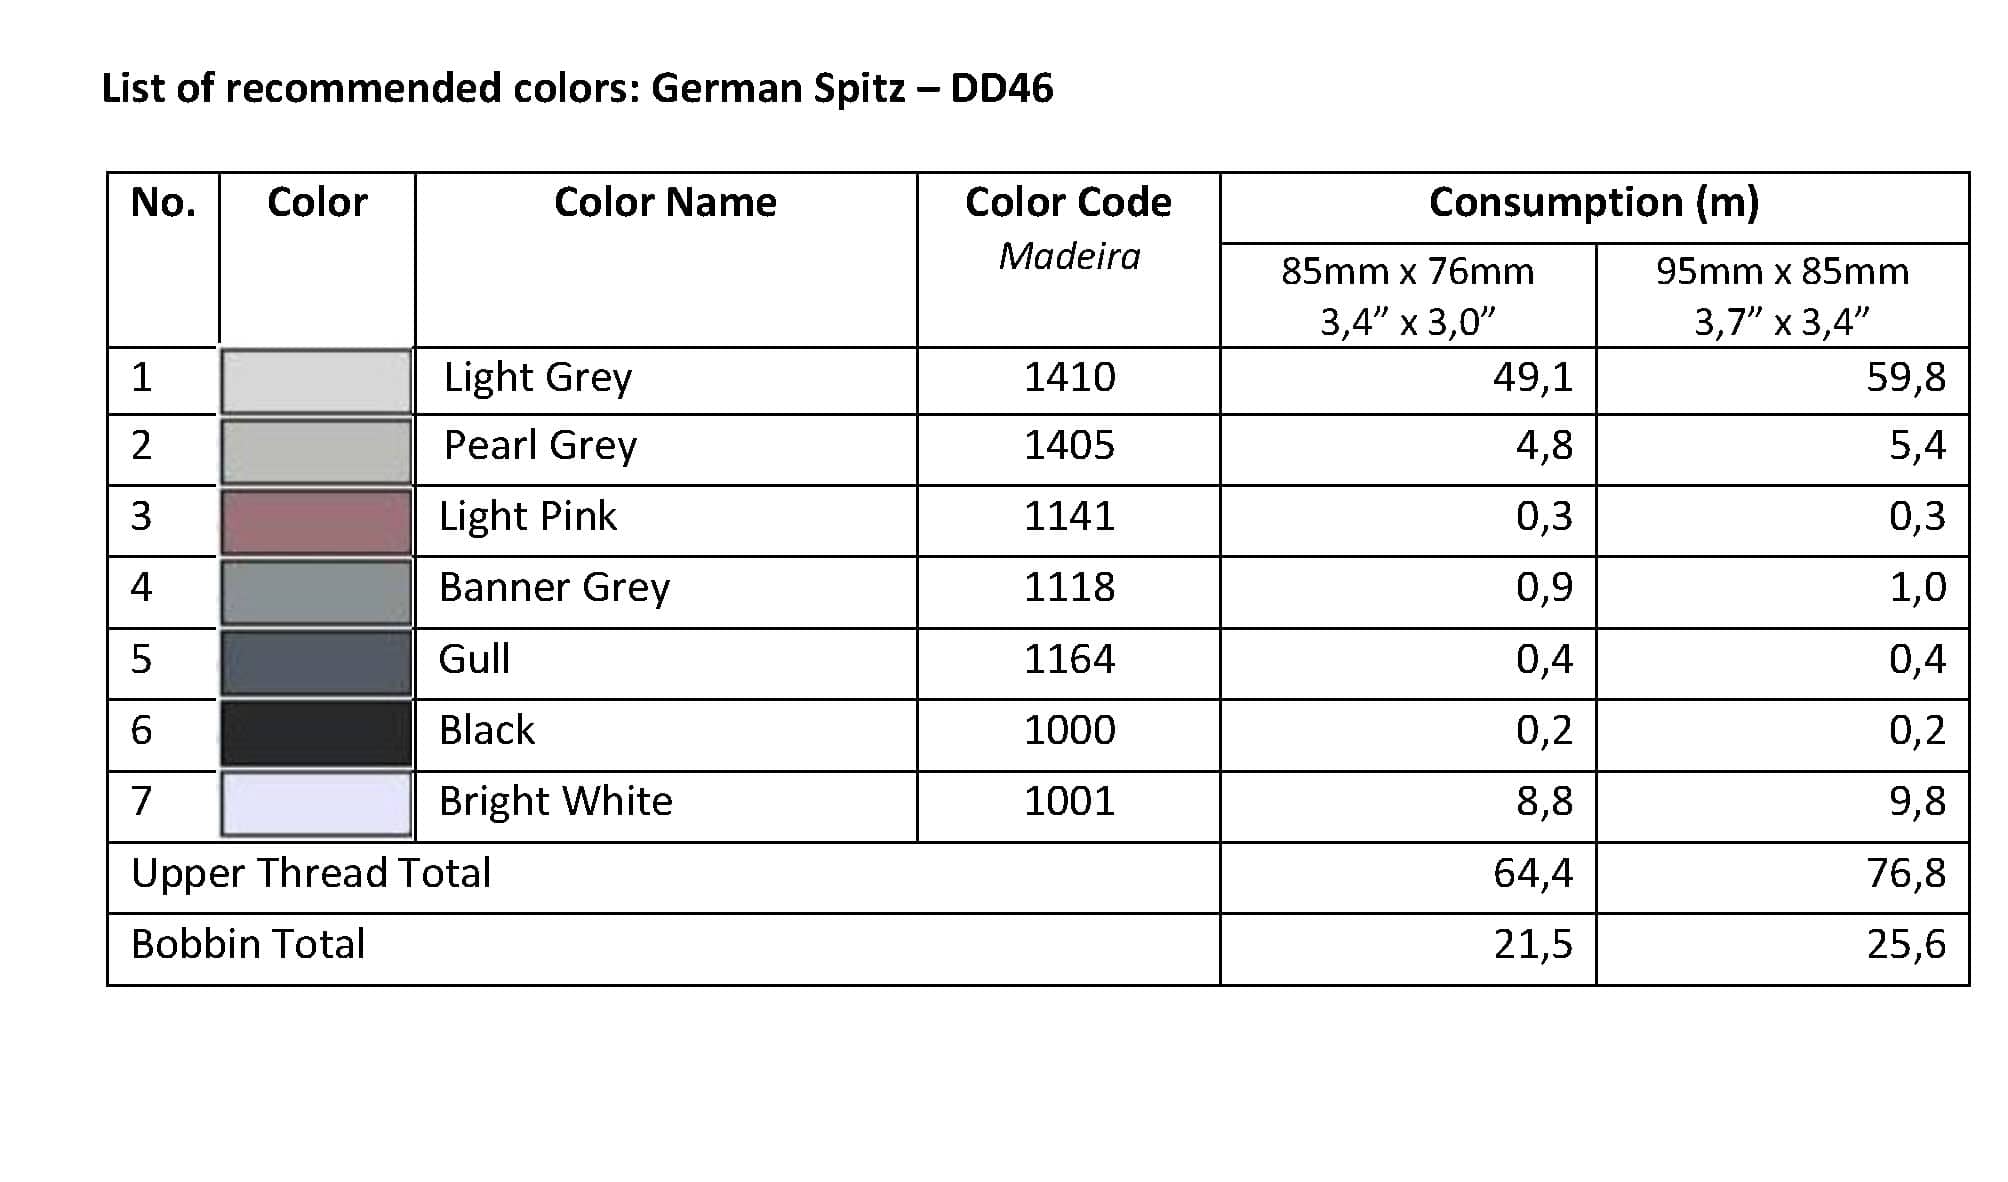 List of Recommended Colors - German Spitz DD46